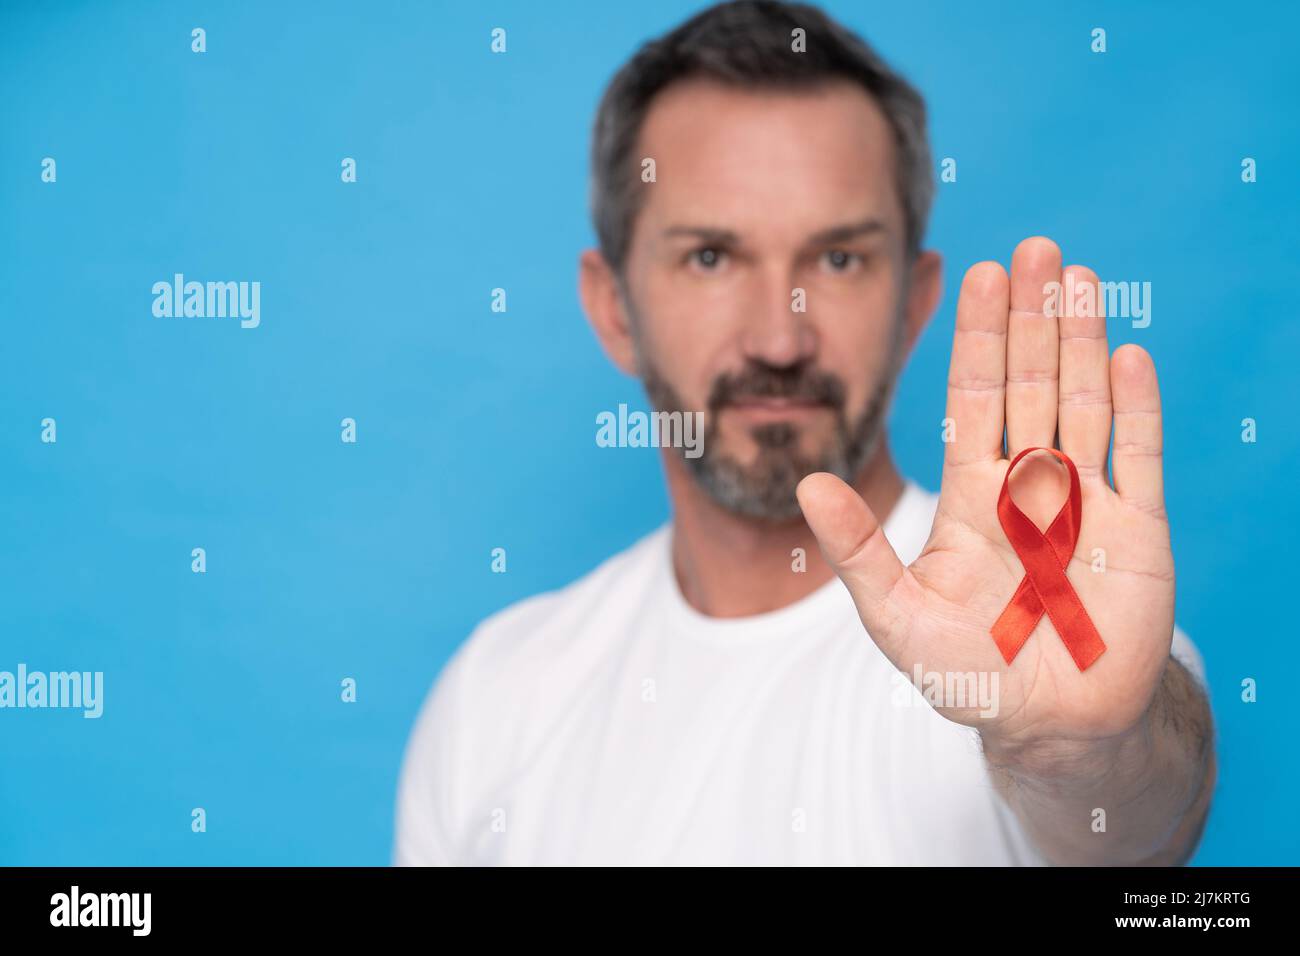 Man hold red ribbon bow AIDS awareness symbol on a heart wearing a white t-shirt isolated on a blue background. Modern medicine and healthcare. AIDS awareness concept. Stock Photo